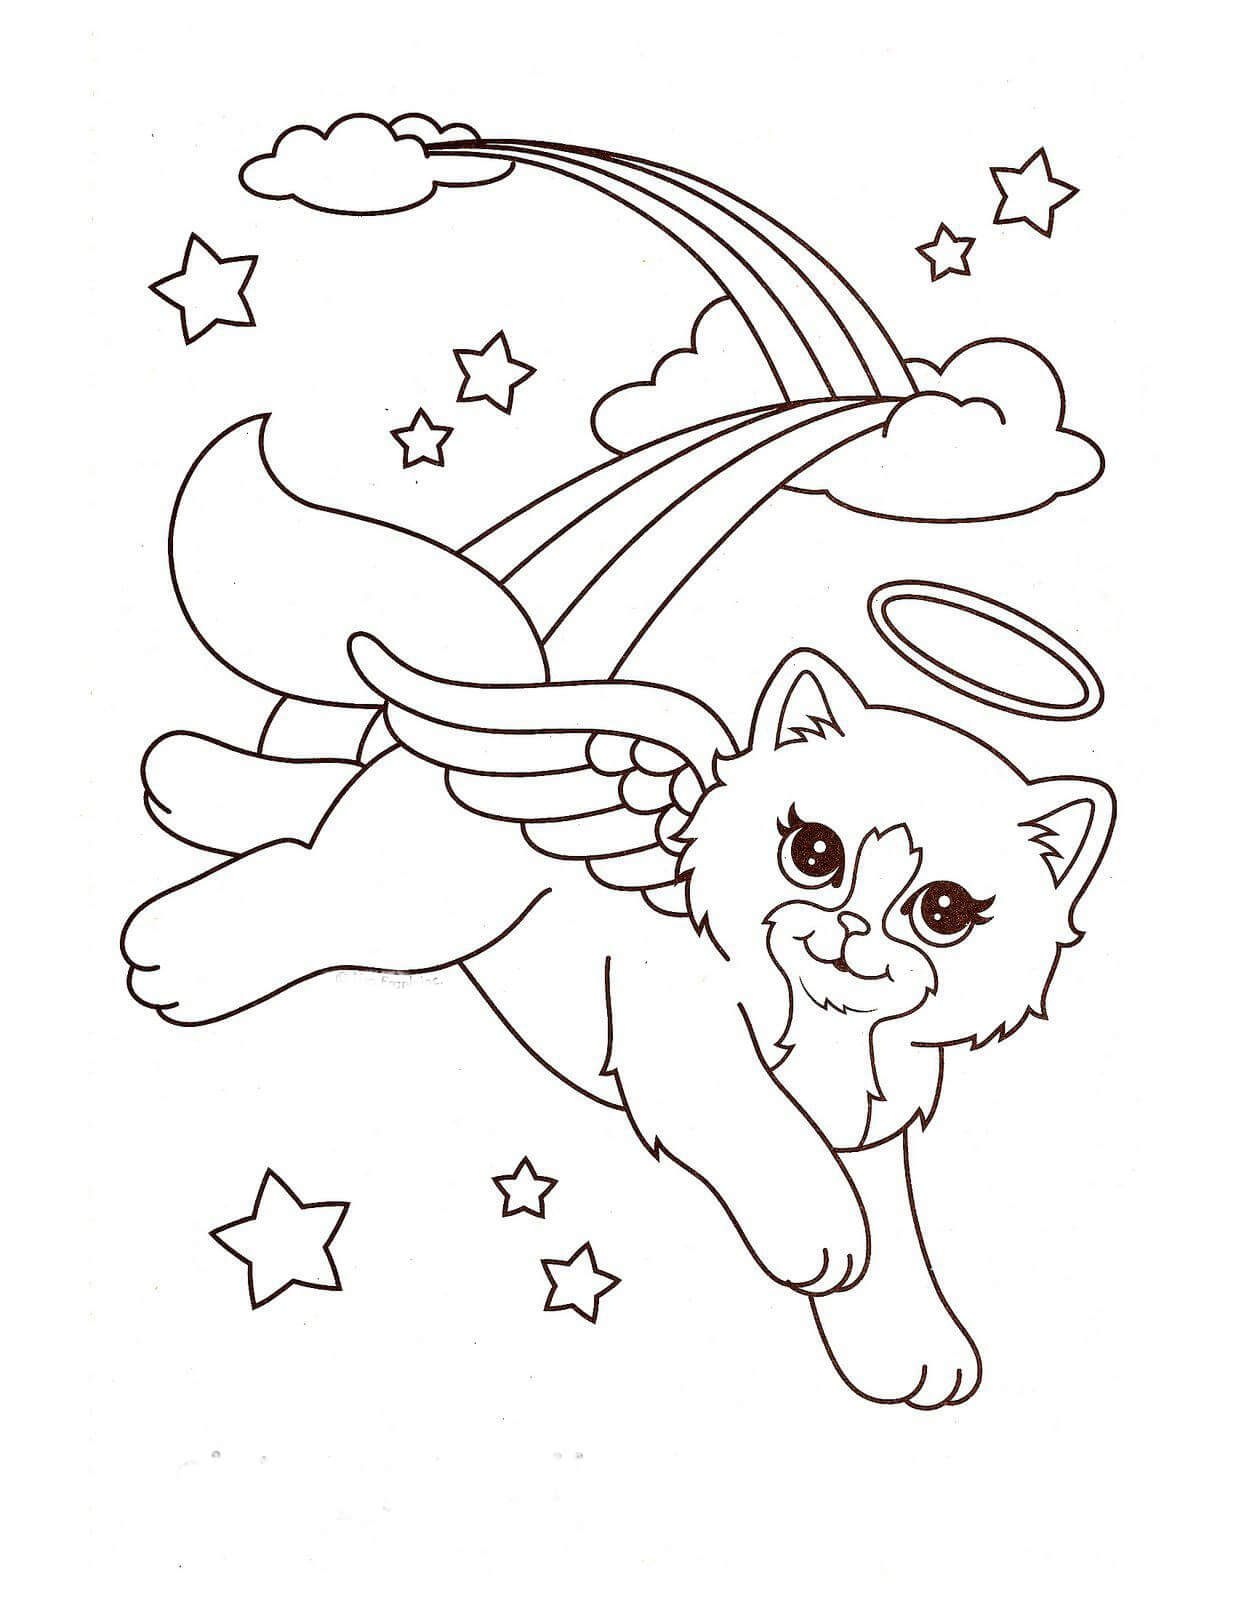 Angel Kitten Coloring Page